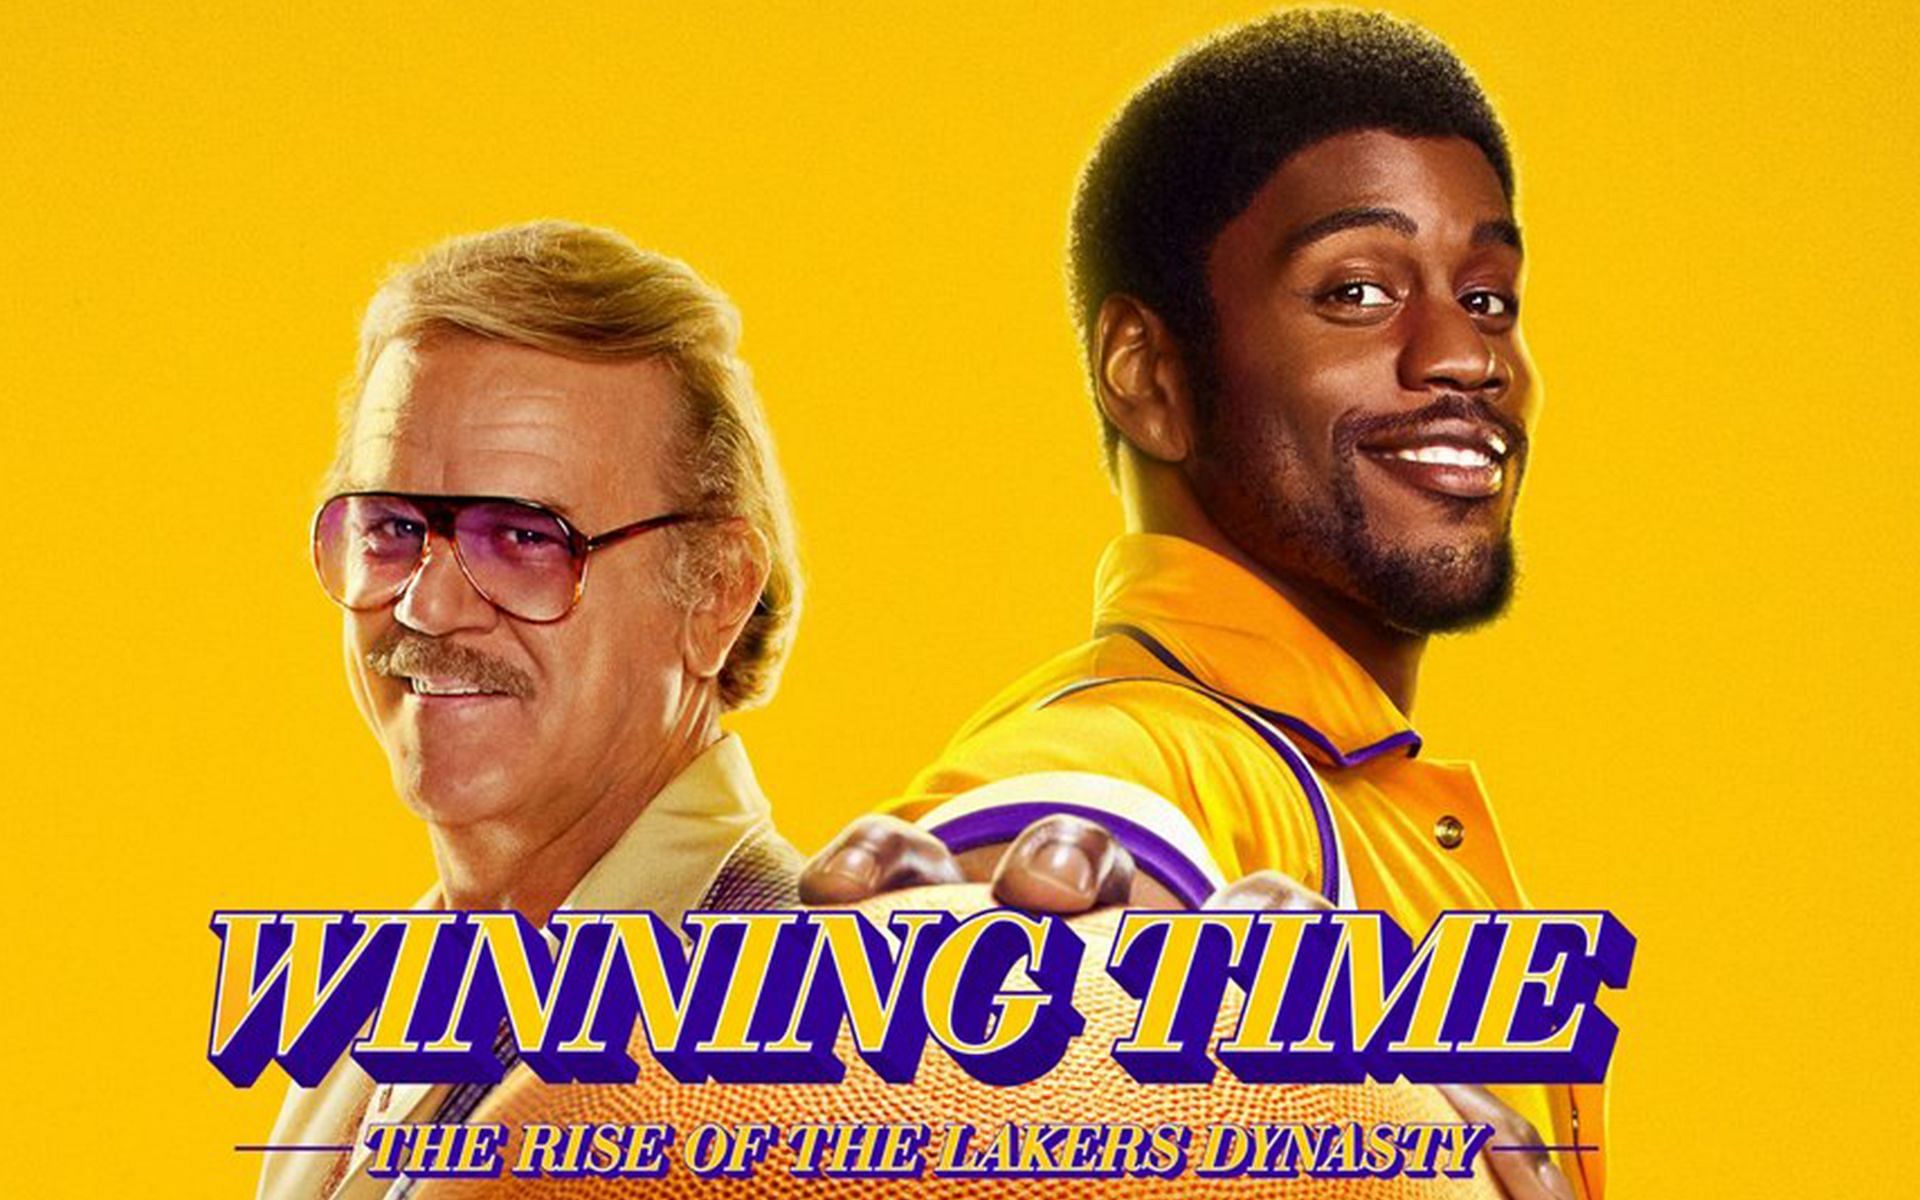 New episodes of Winning Time: The Rise of the Lakers Dynasty premiere on HBO Max every Sunday at 9 p.m. EST. (Image via IMDb)